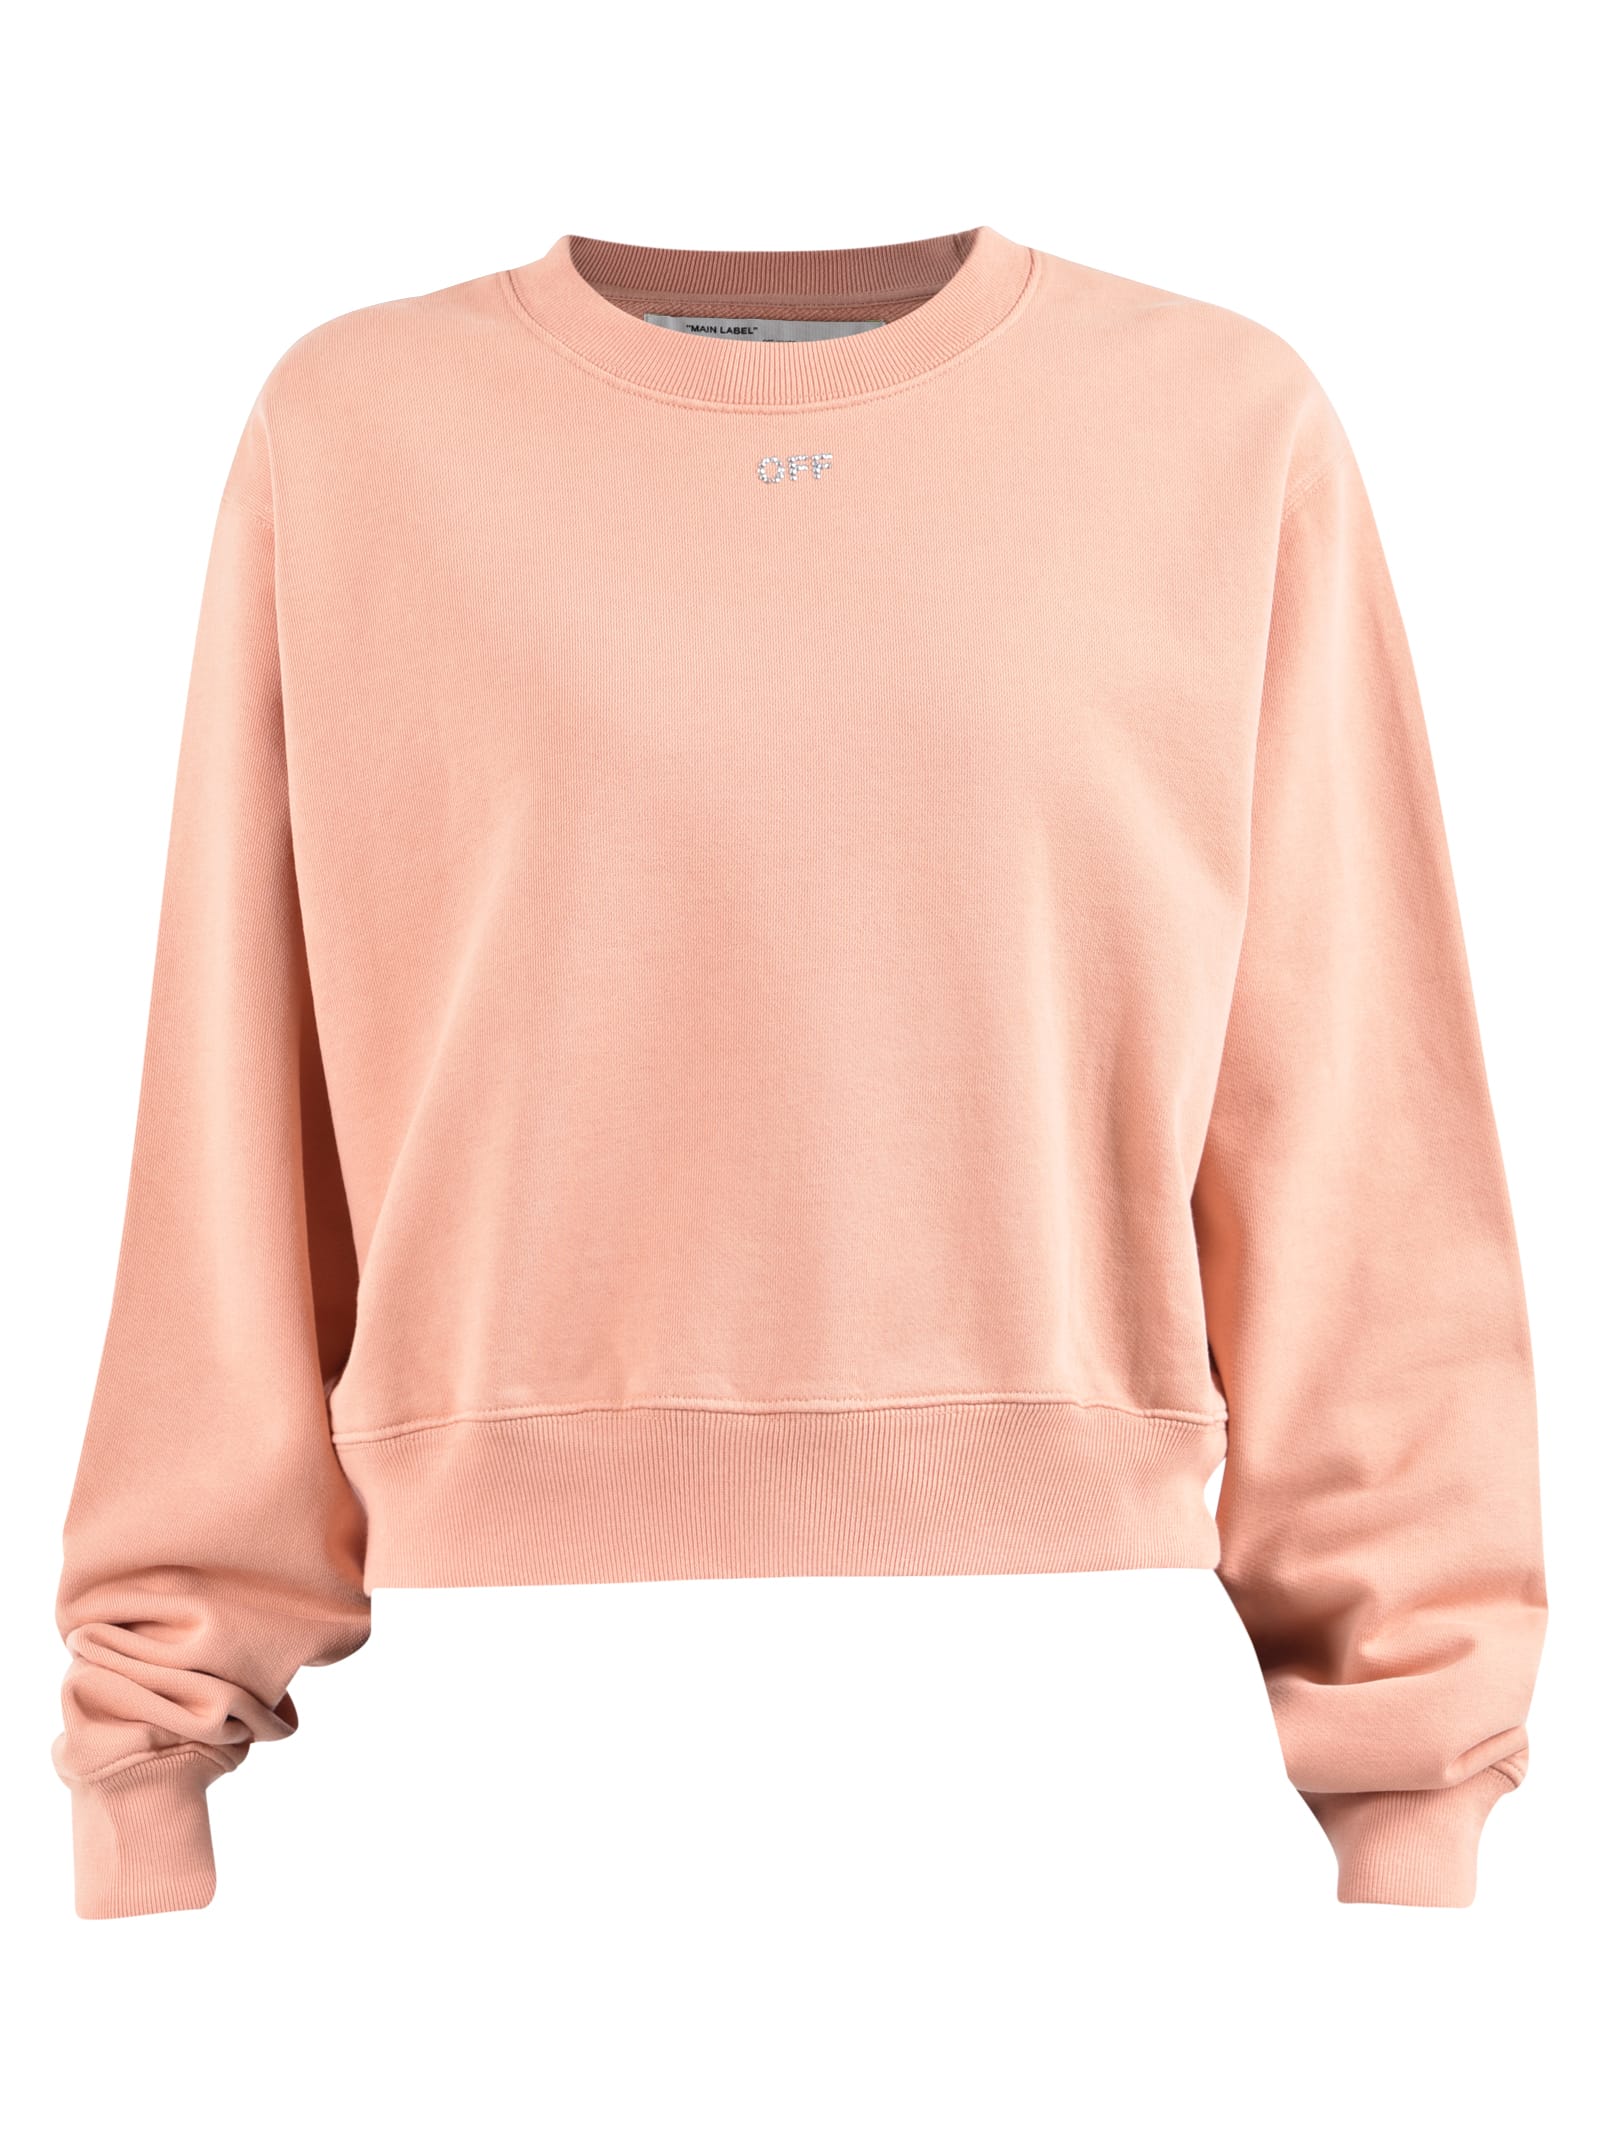 pink off white sweater